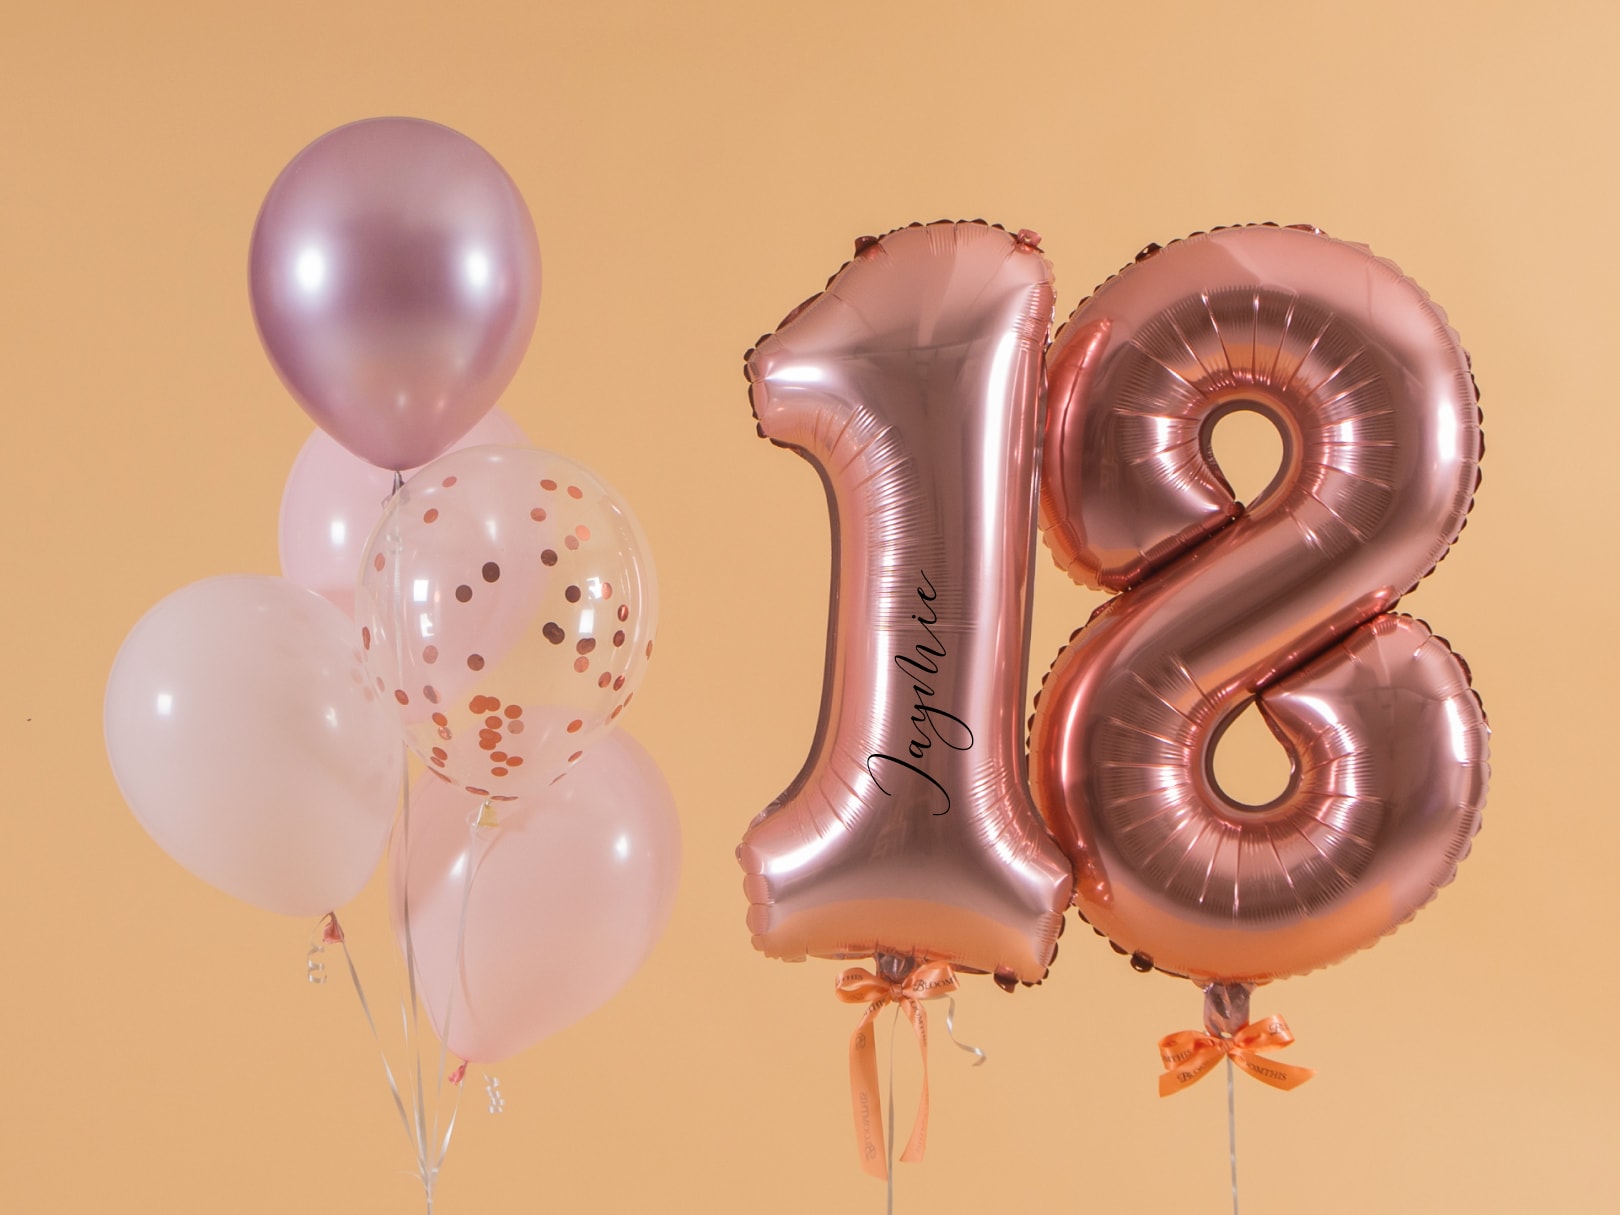 bloomthis-balloons-number-balloons-usp-02-lasting-helium-number-balloons